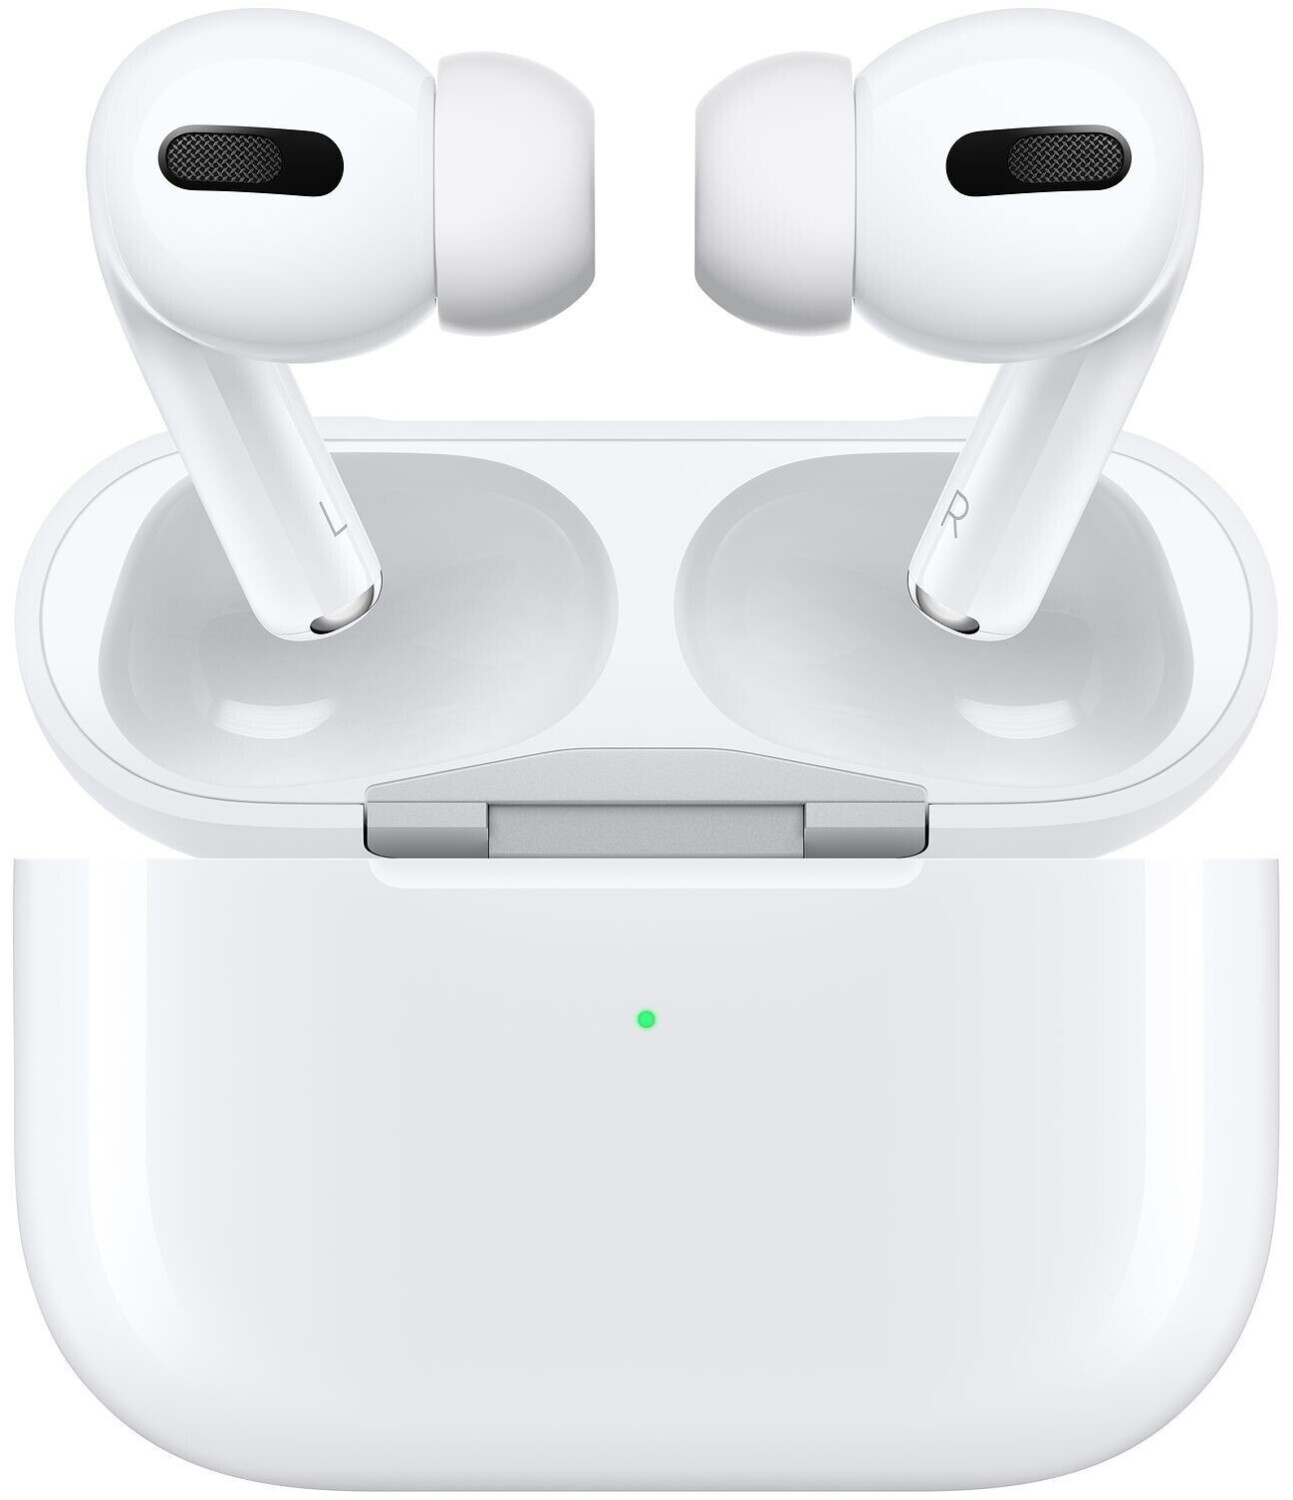 Comment nettoyer ses AirPods facilement ?